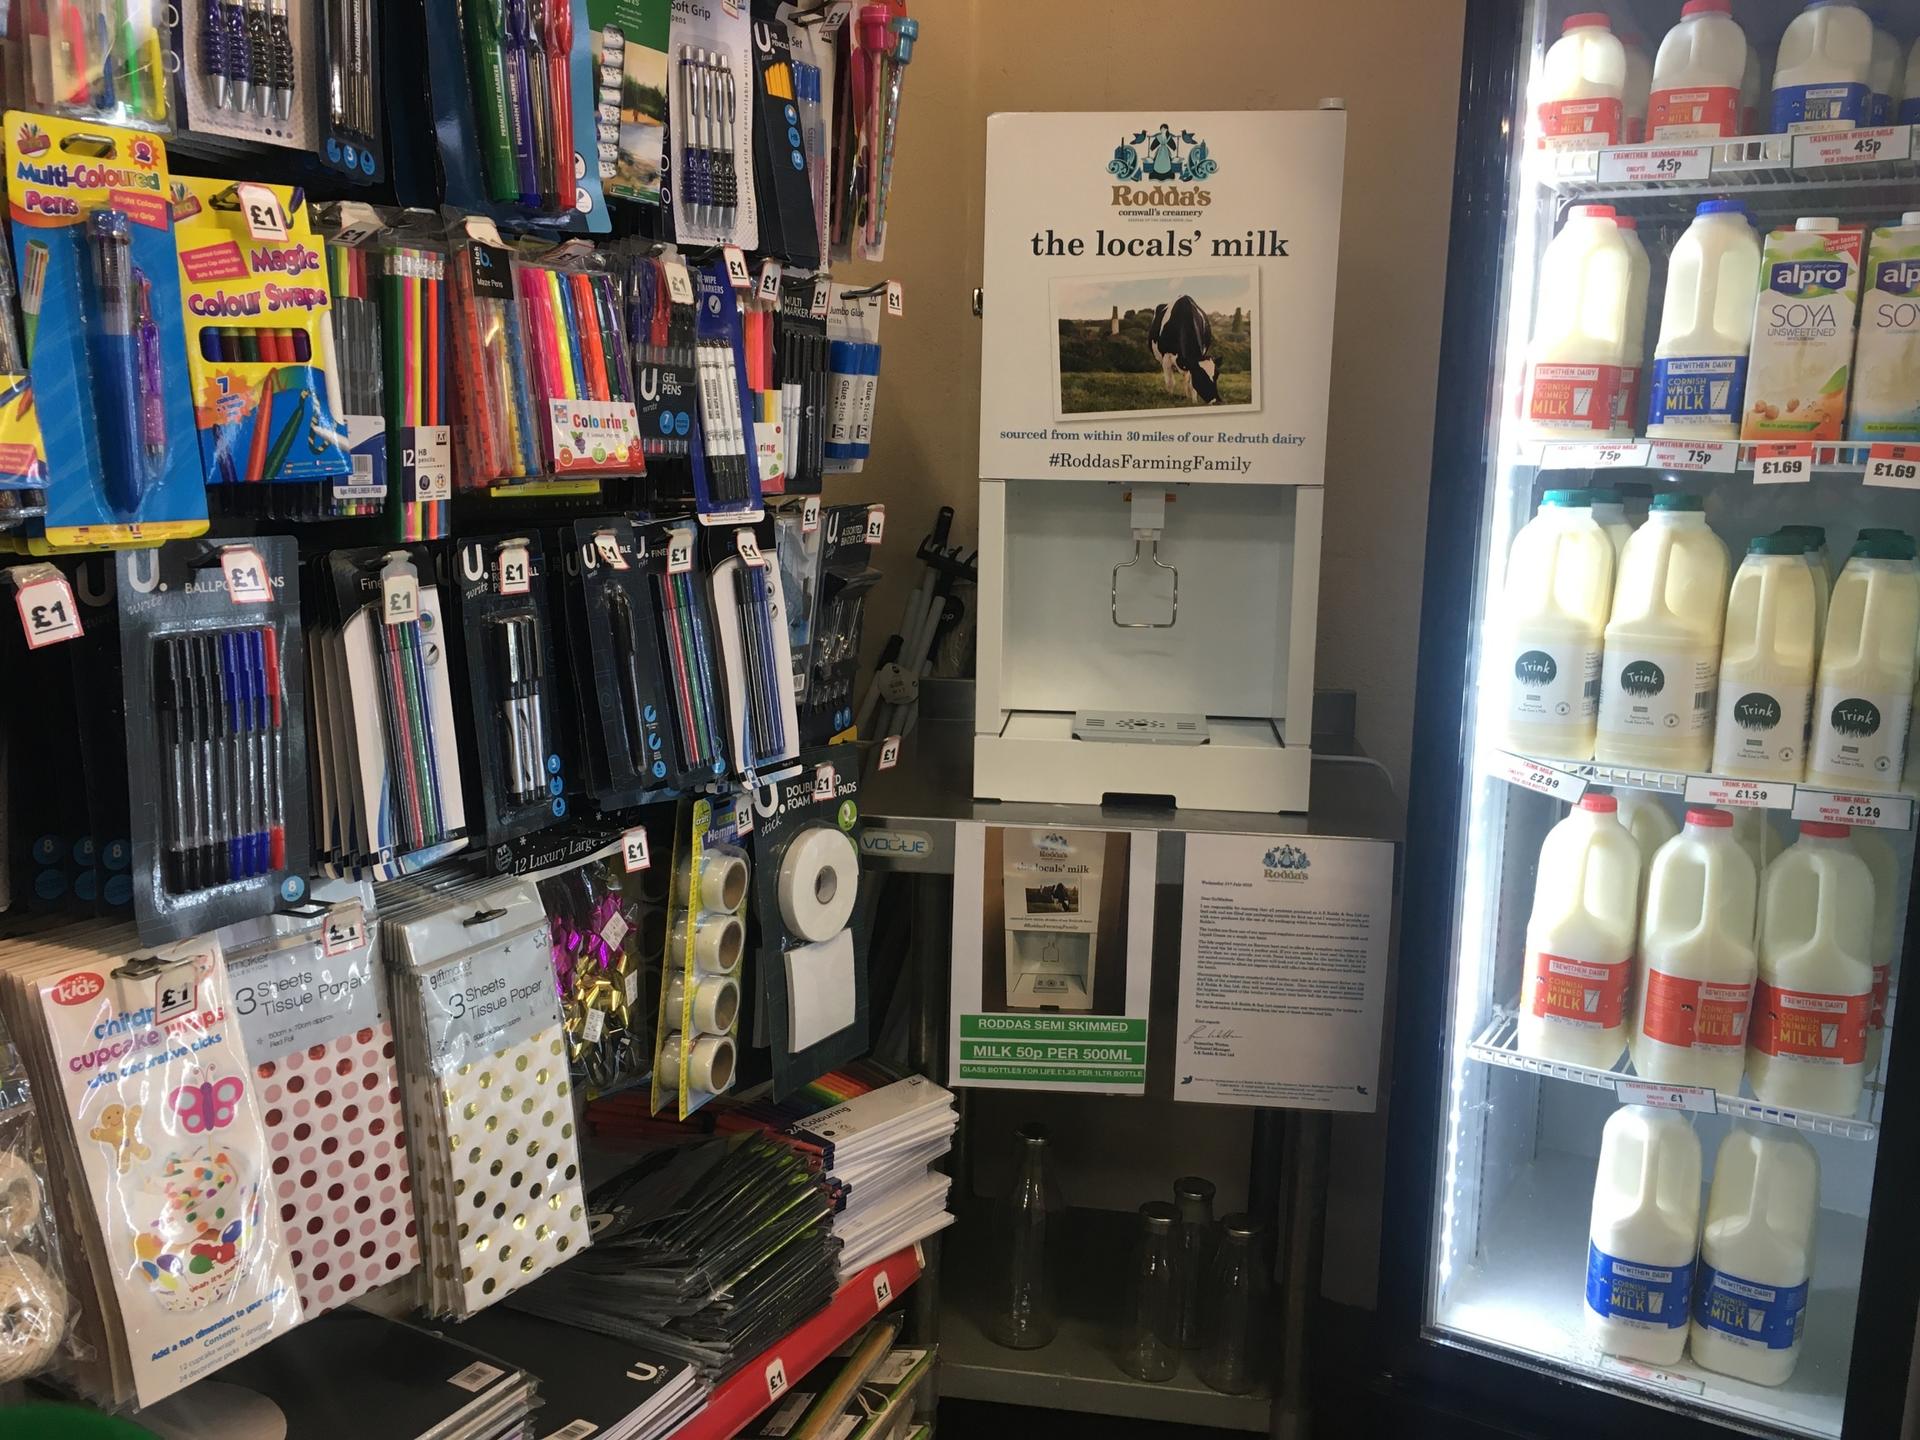 In a bid to offer customers a plastic-free option, Thornes has just set up a milk refill machine stocked with local milk. Customers can pick up glass bottles and bring them back.